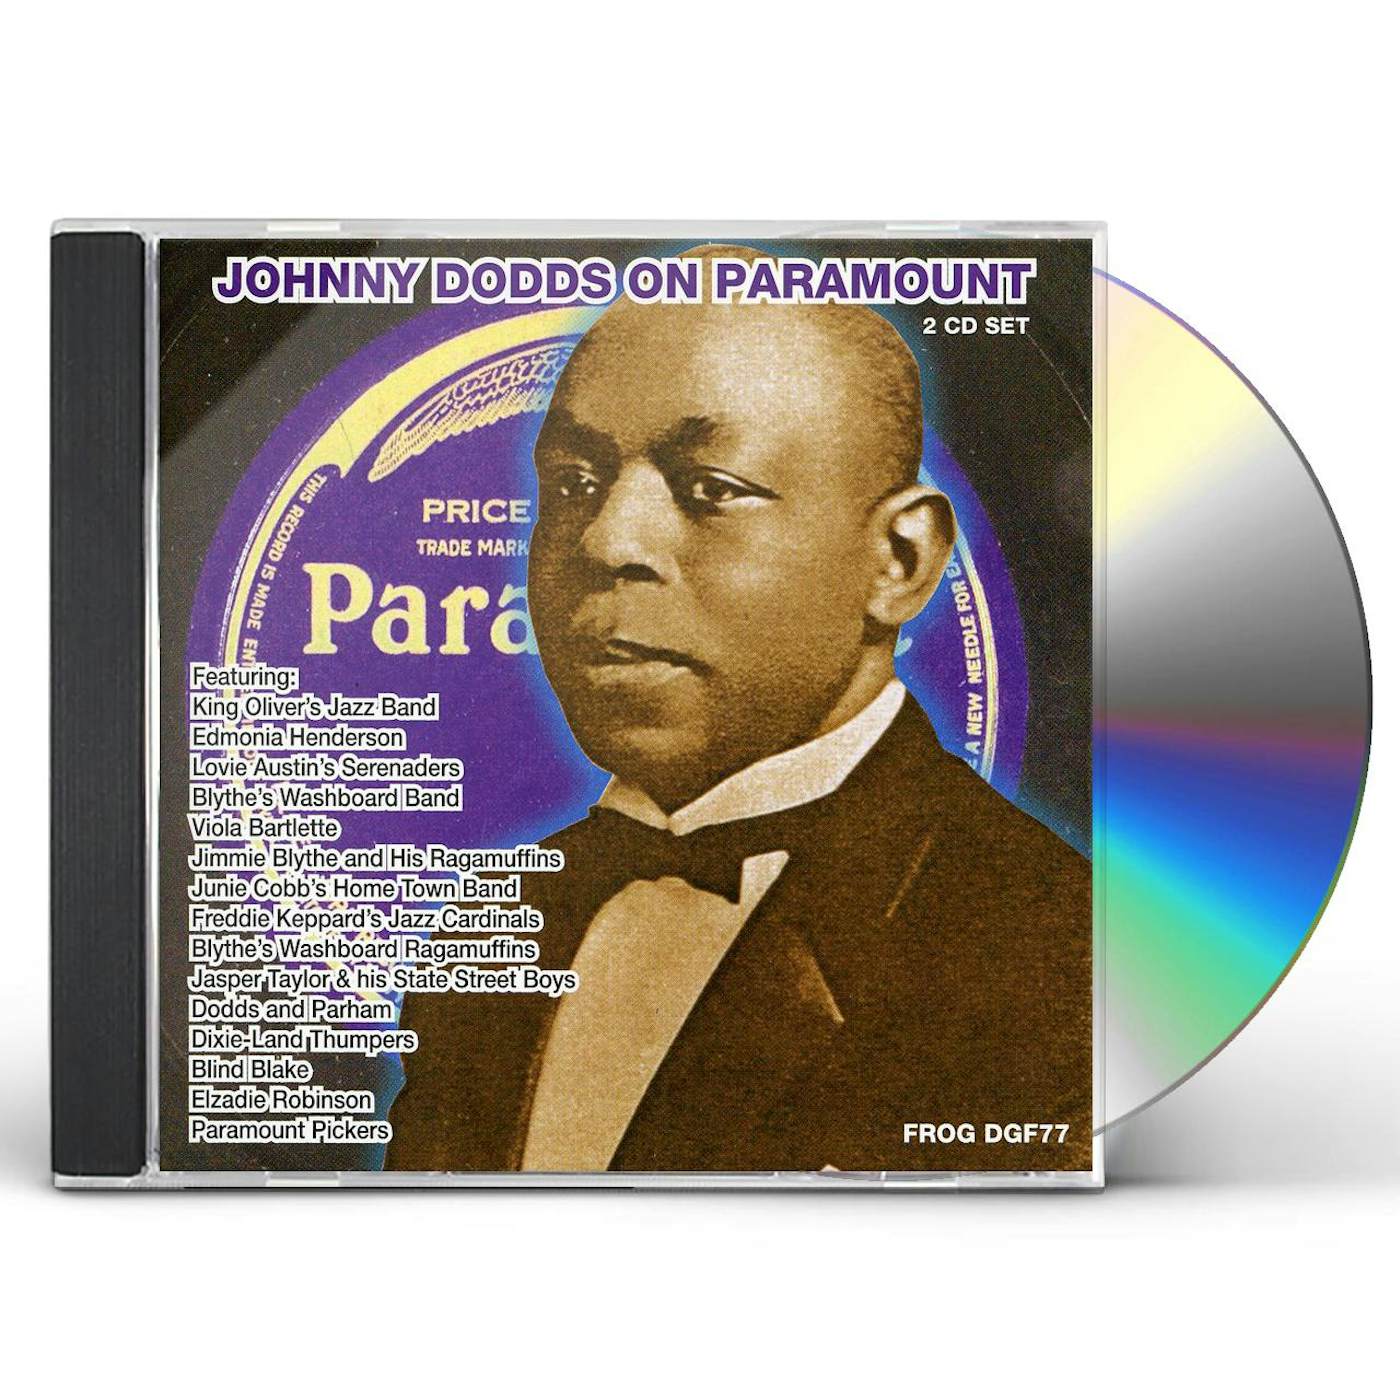 JOHNNY DODDS ON PARAMOUNT CD